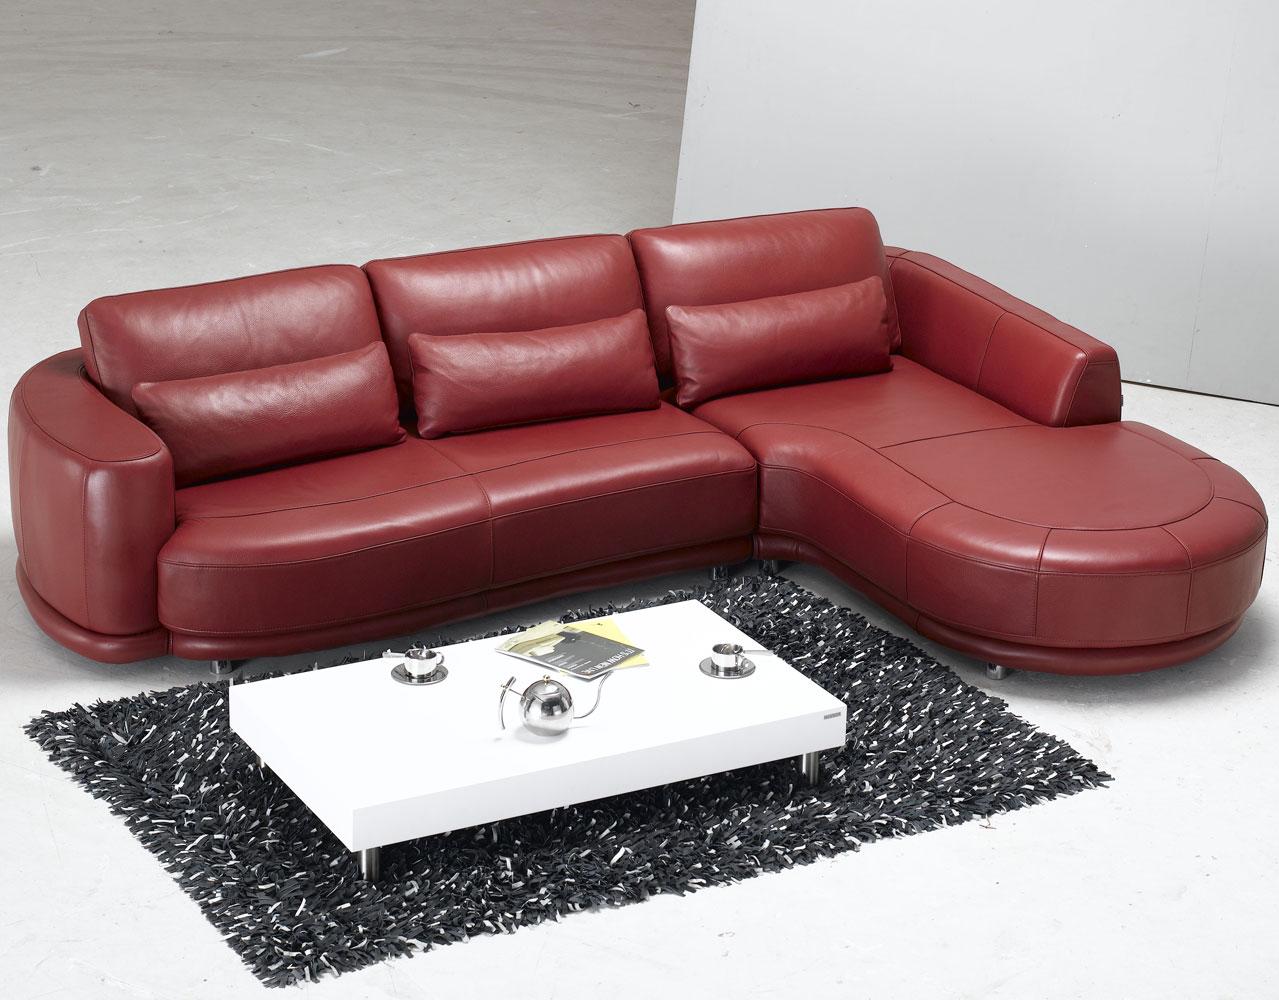 Room Present Rug Living Room Present Modern Black Rug Design And Curved Red Leather Sofa Plus Sleek Small Coffee Table Furniture  Terrific Small Coffee Table For Living Room 